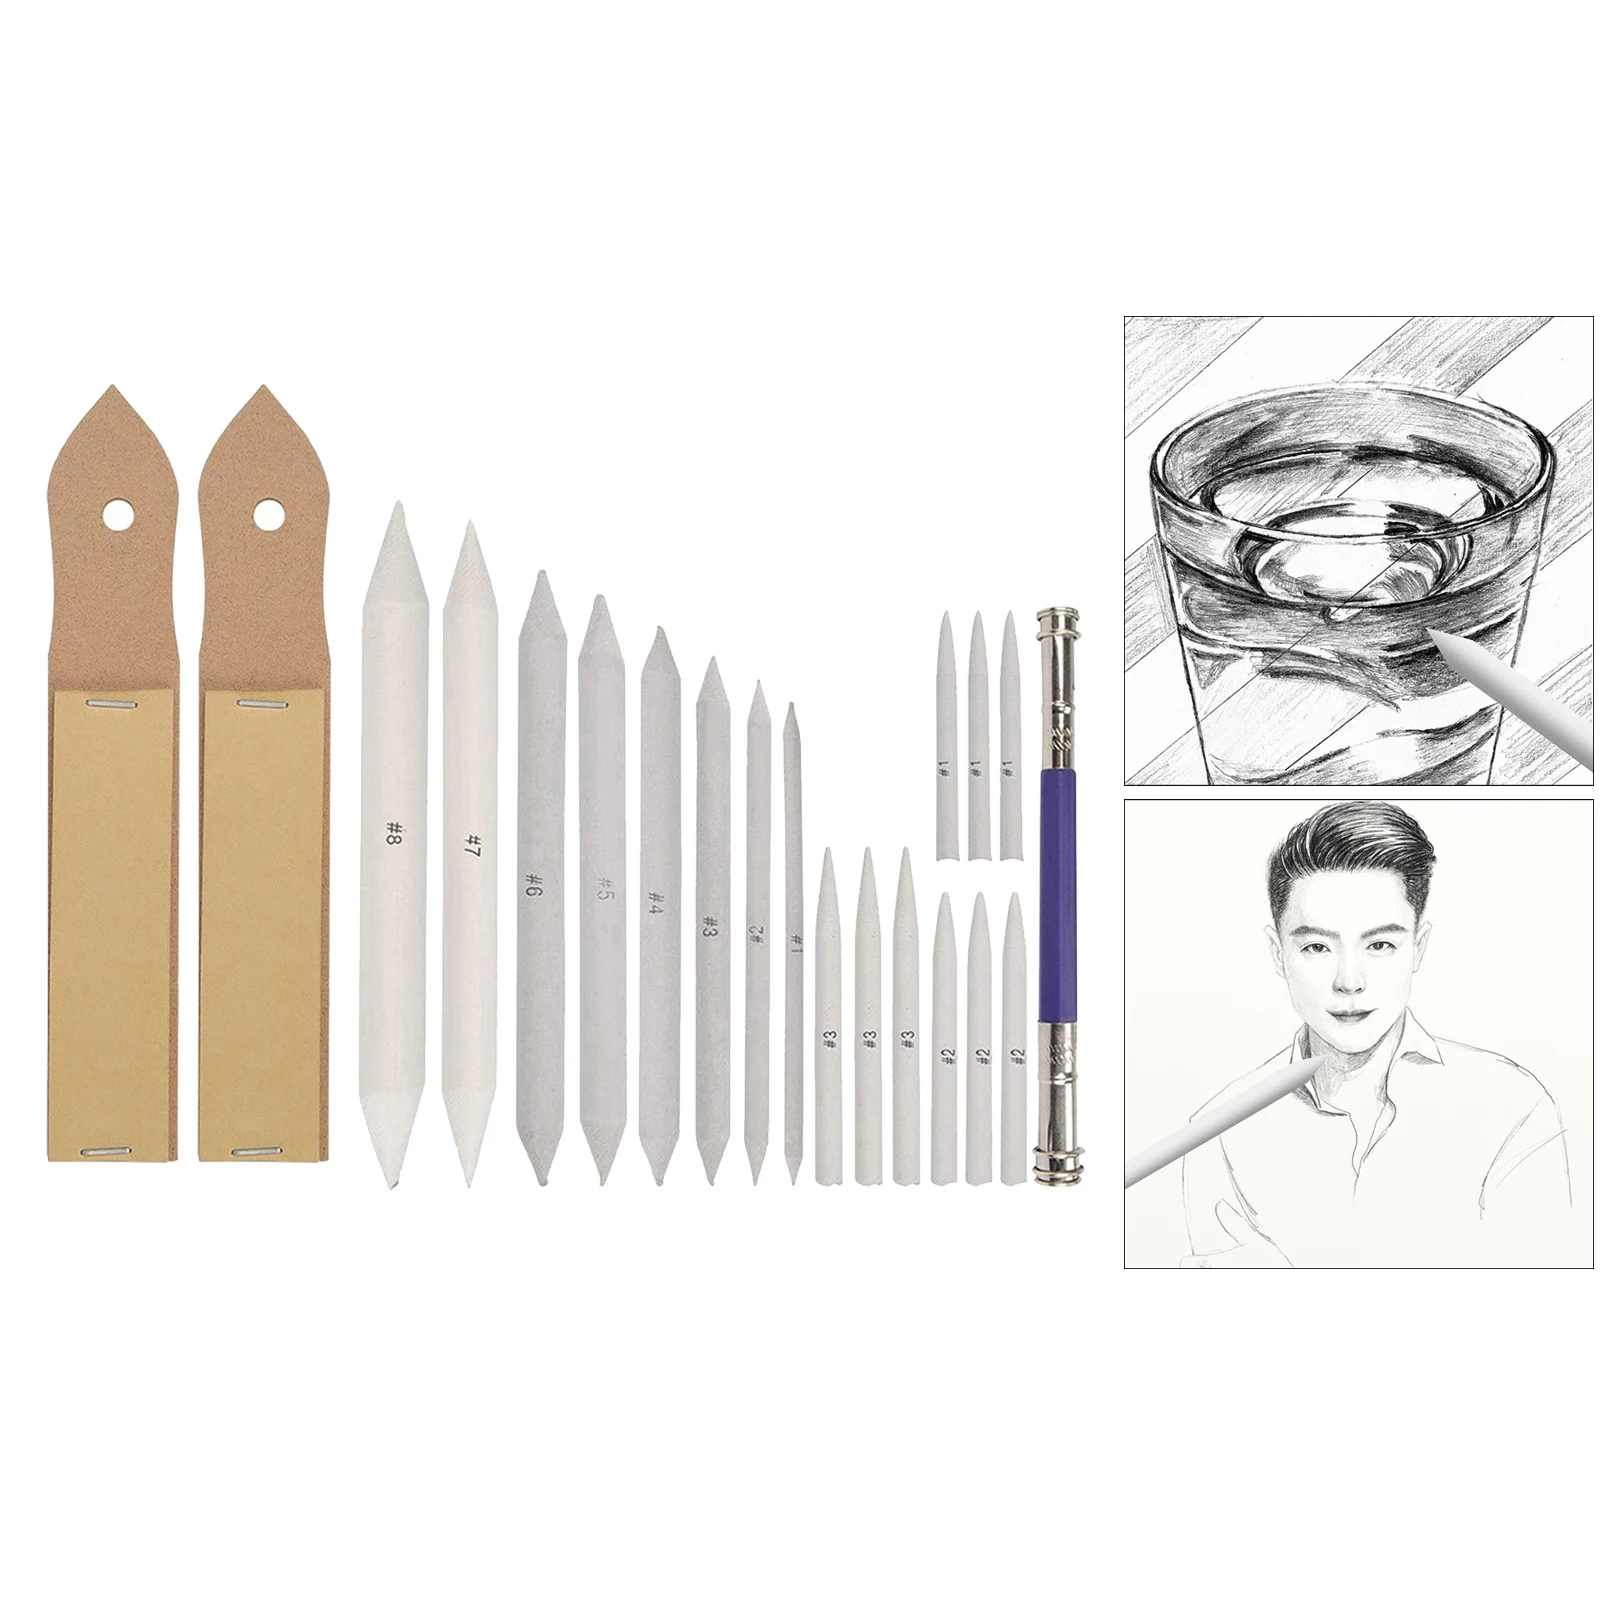 BronaGrand 15 Pieces Blending Stumps and Tortillions Set with 2 Pieces Sandpaper Pencil Sharpener and 2 Pieces Pencil Extension Tools for Sketch Drawing 